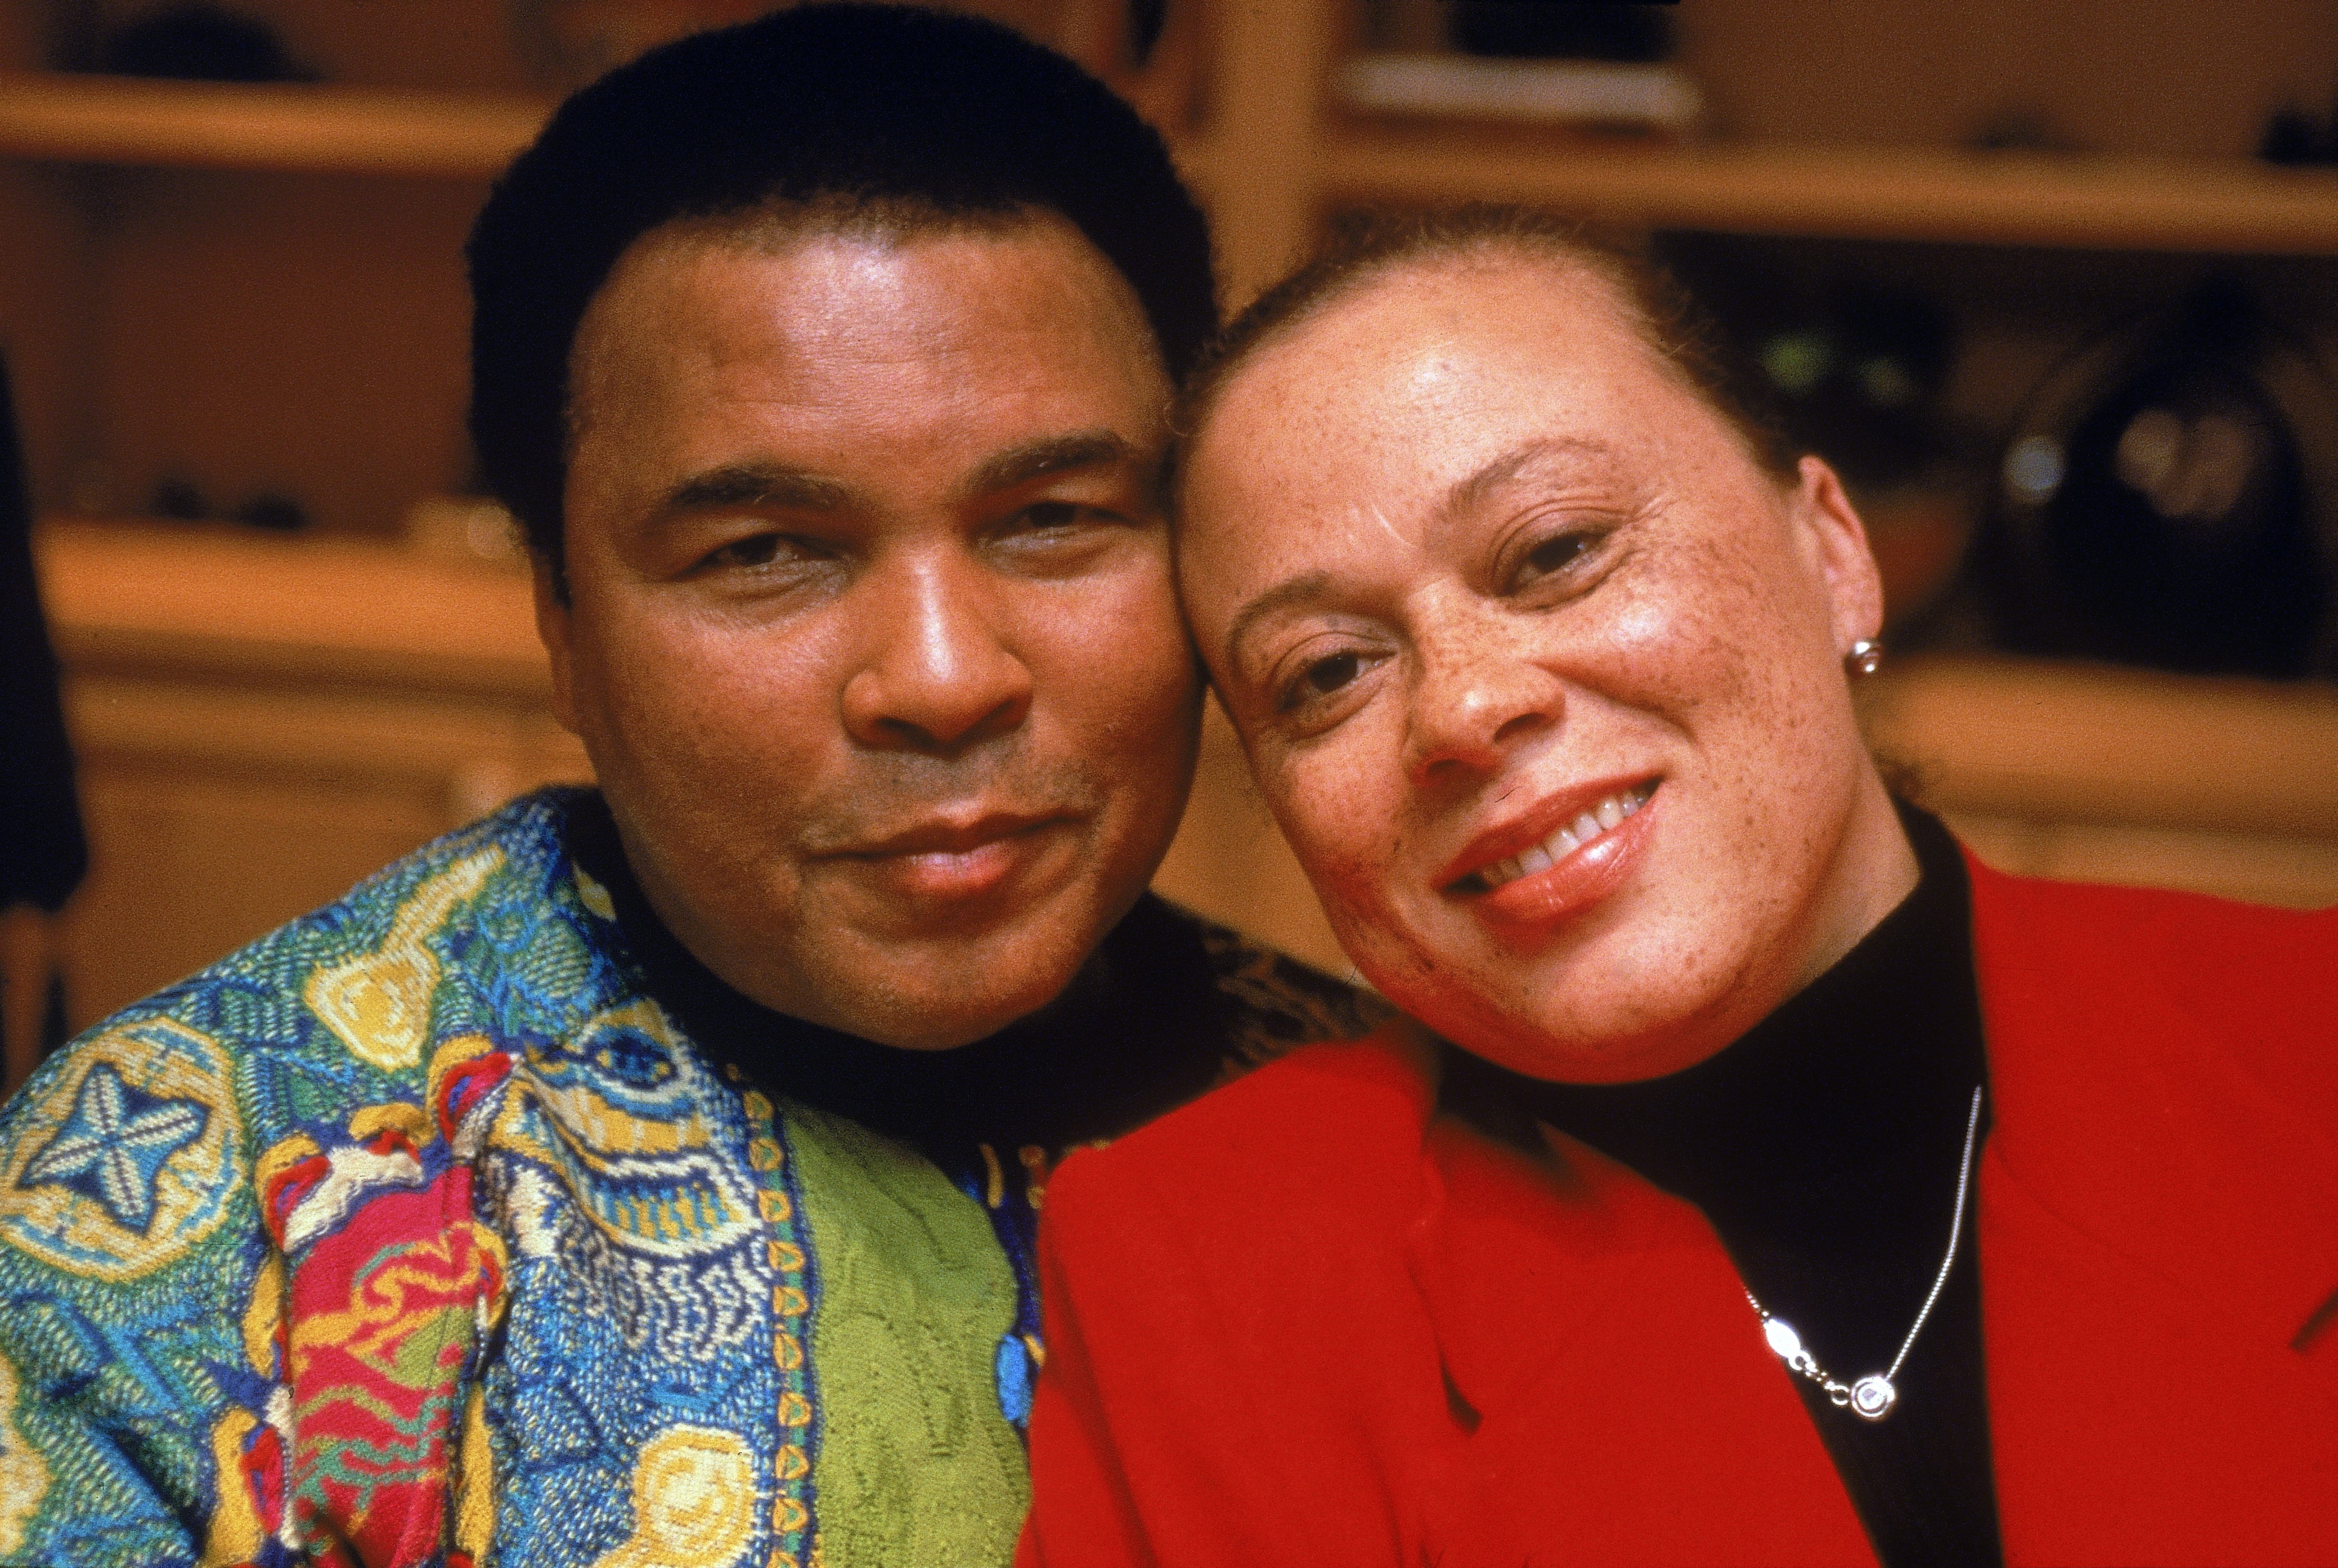 Muhammad Ali poses with Yolanda "Lonnie" Williams Ali at Berrien Springs, Michigan in July 1999. | Source: Getty Images